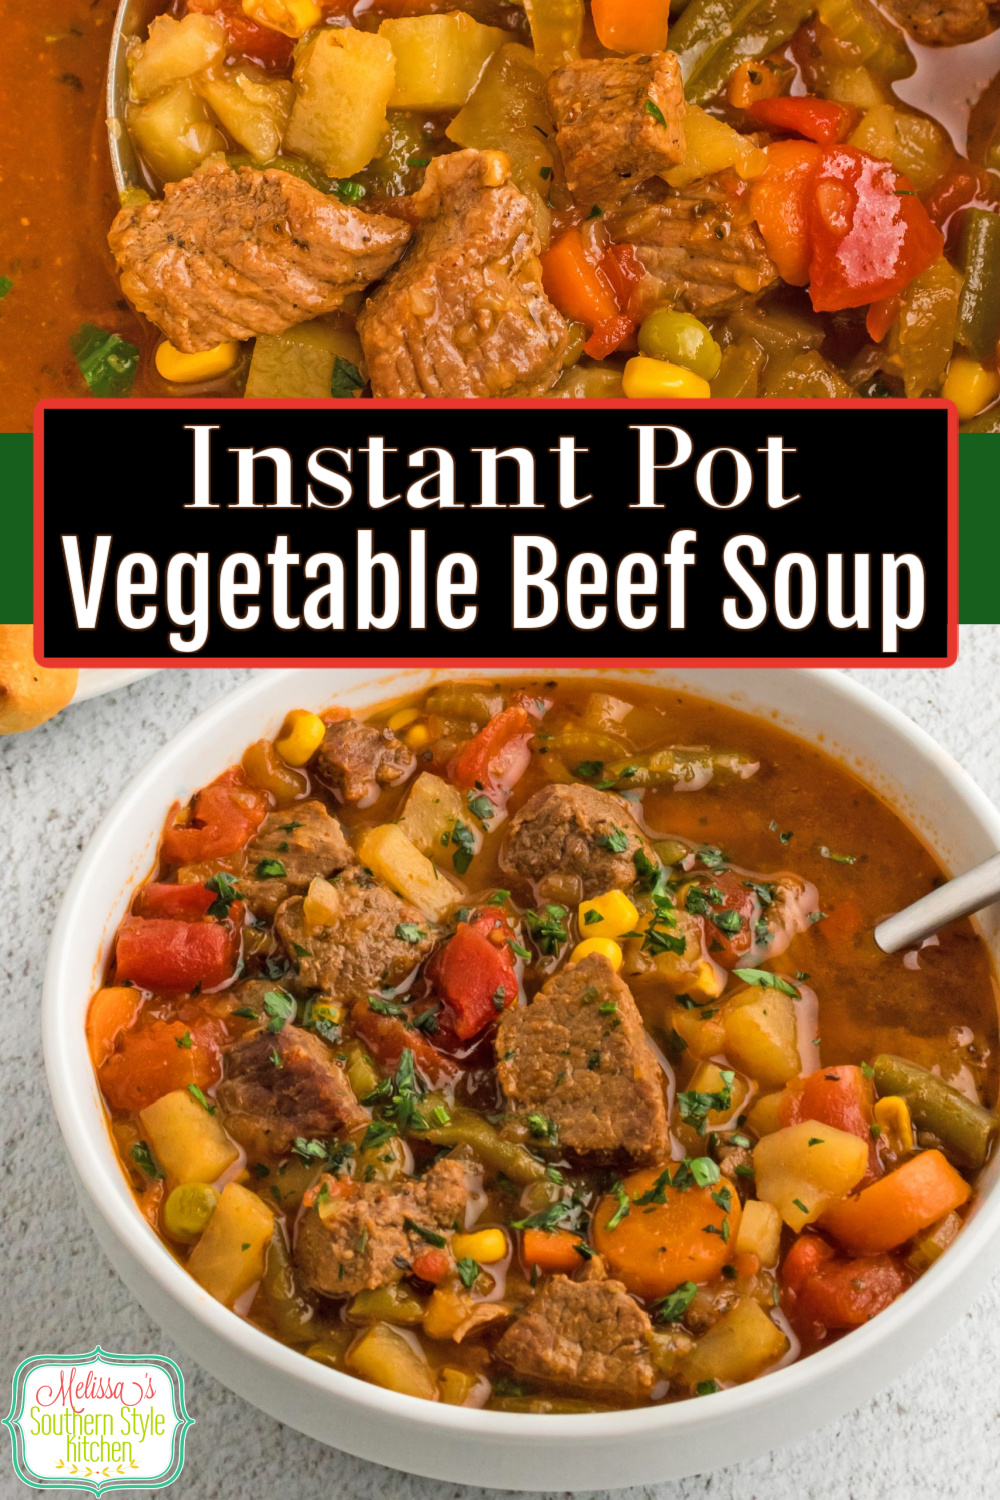 This Instant Pot Vegetable Beef Soup results in a flavorful soup with tender and juicy chunks of beef.  Bonus, stovetop instructions included! #instantpot #instantpotsoup #souprecipes #vegetablebeefsoup #beef #souprecipes #instantpotvegetablebeefsoup via @melissasssk